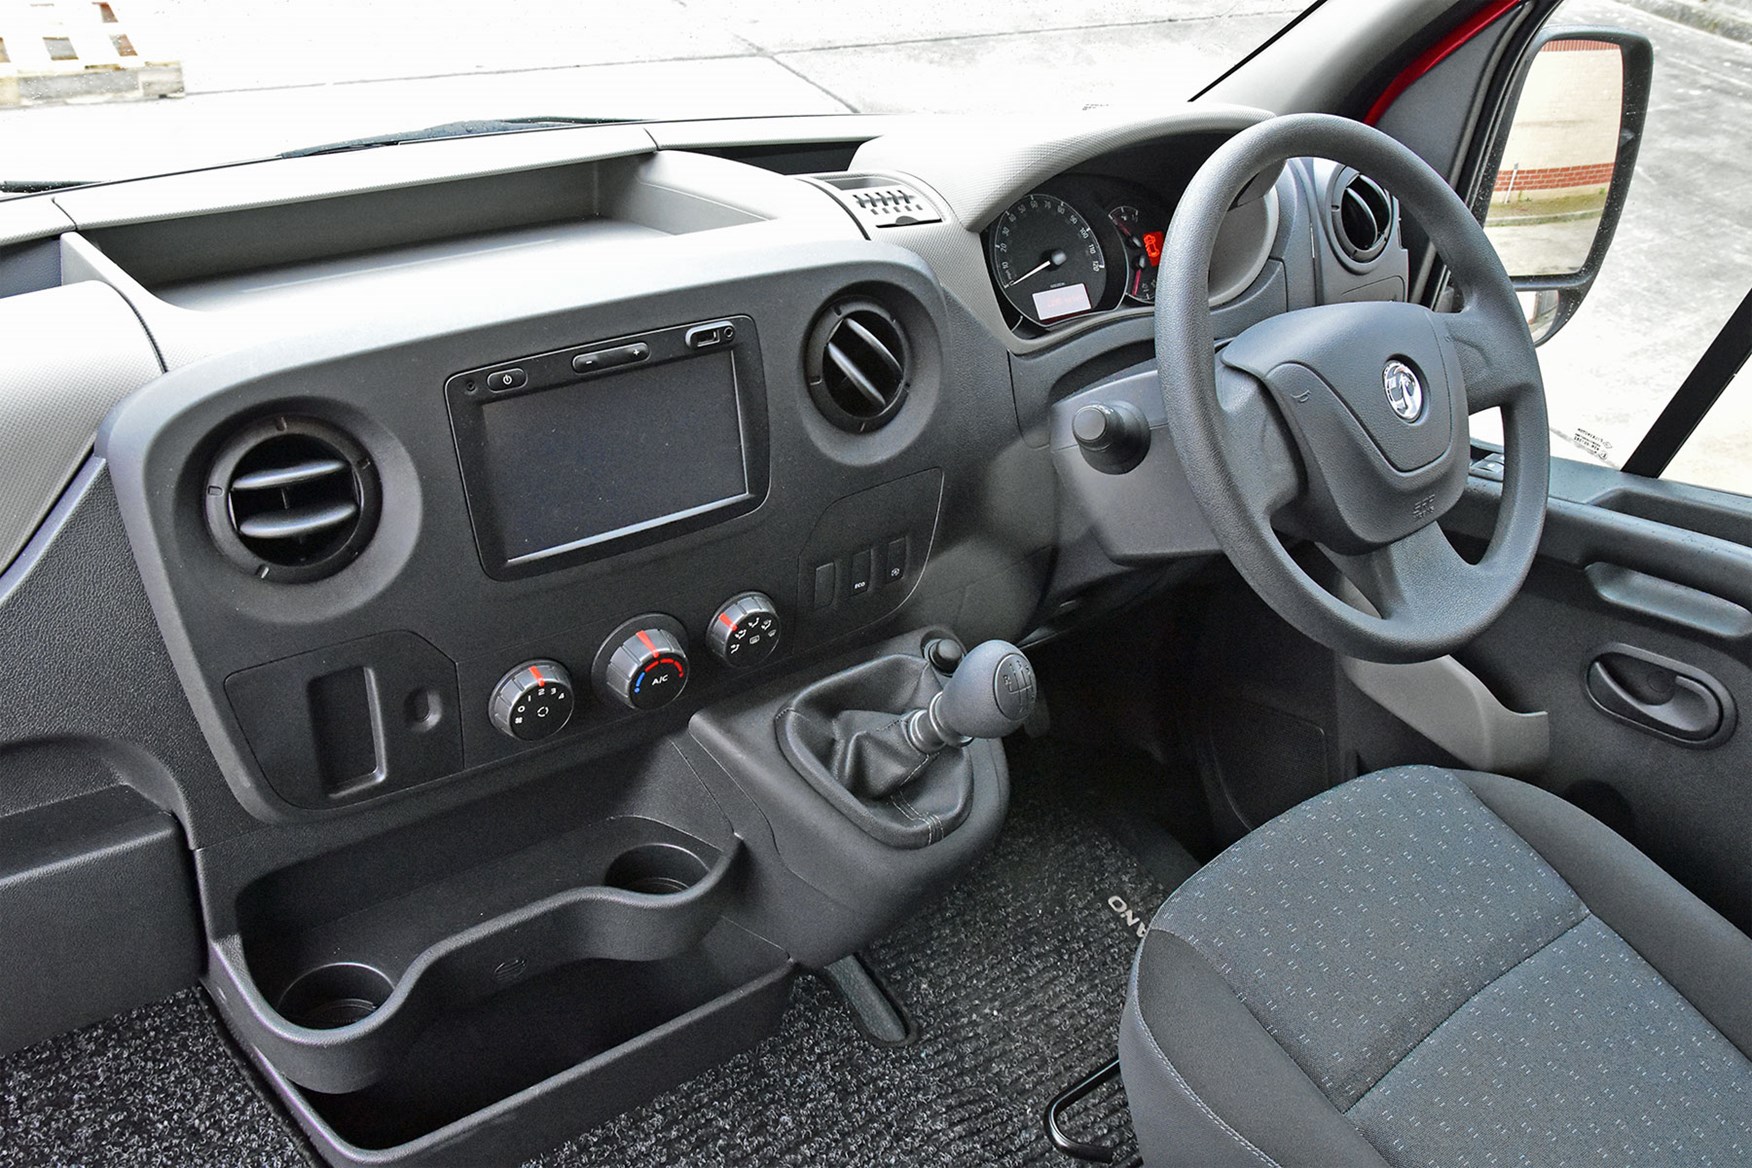 Vauxhall Movano 145hp FWD review - cab interior 2017